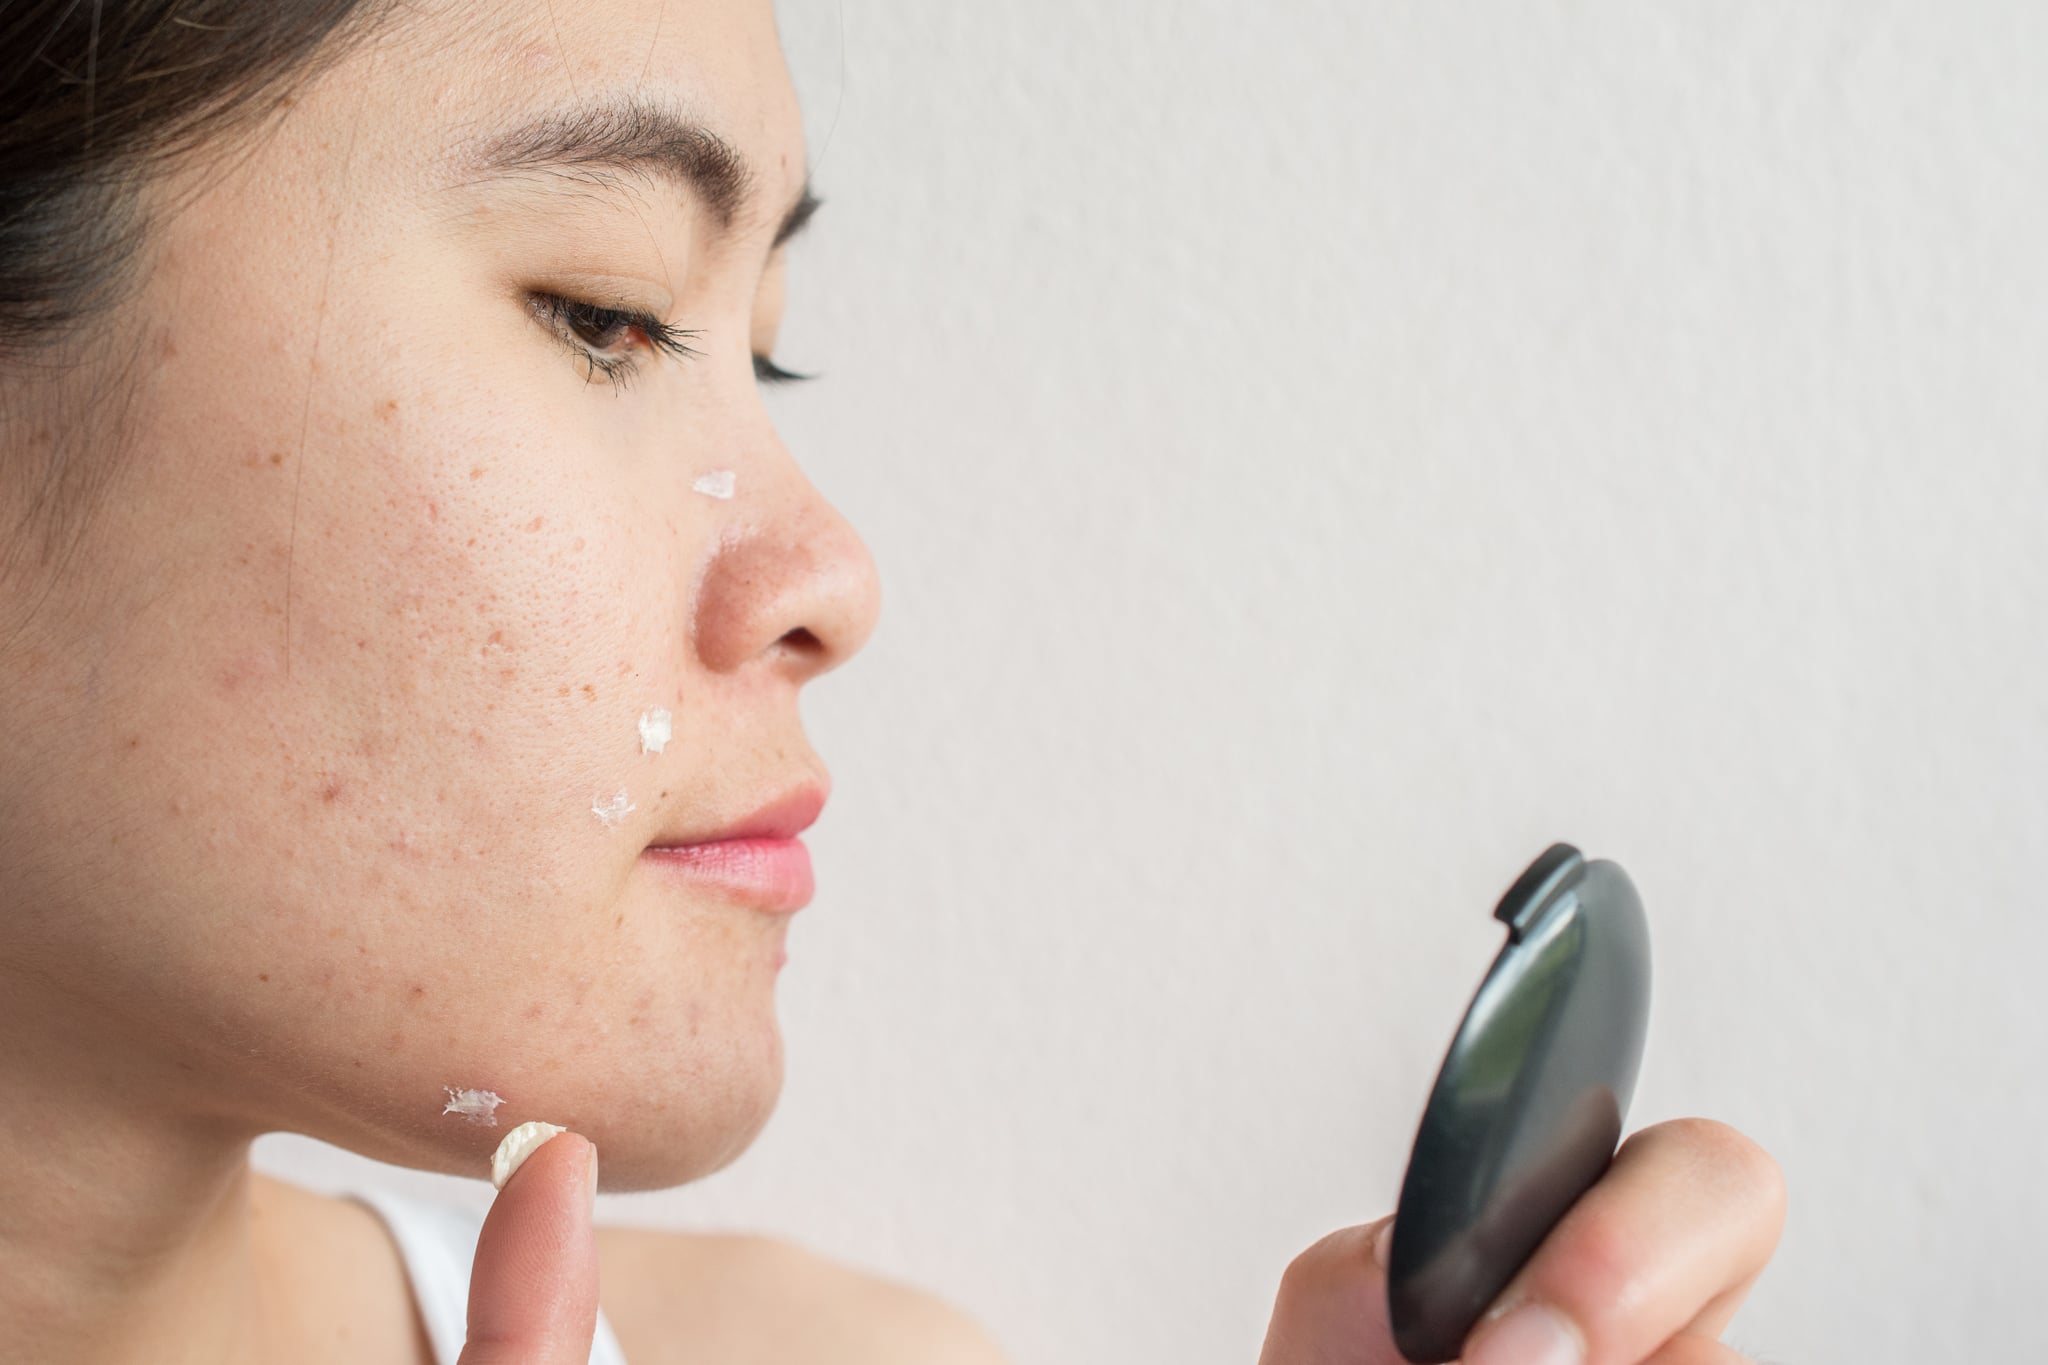 To heal a overnight how popped pimple How to